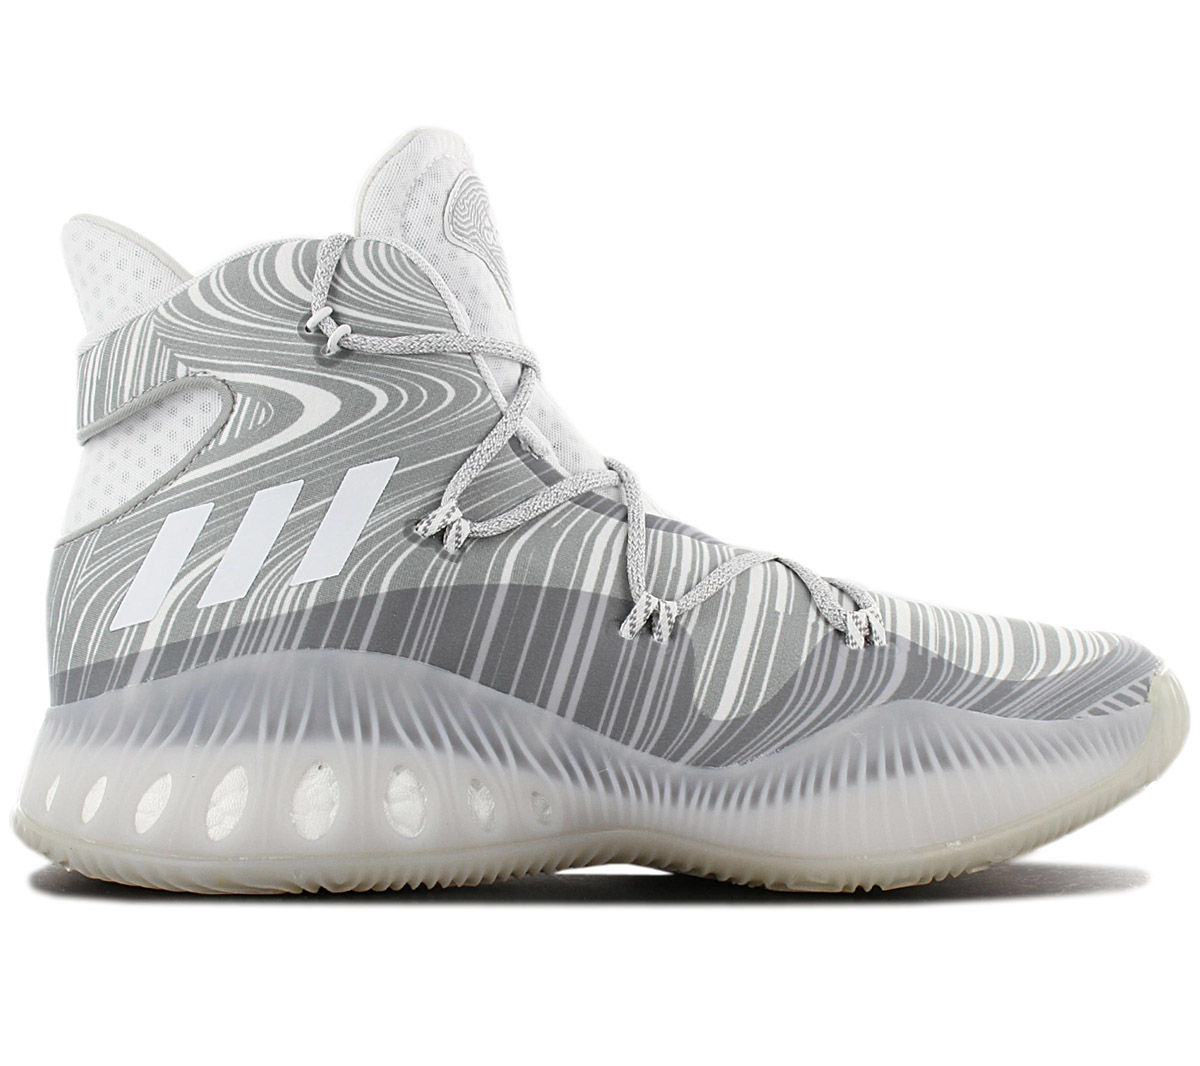 adidas crazy boost basketball shoes